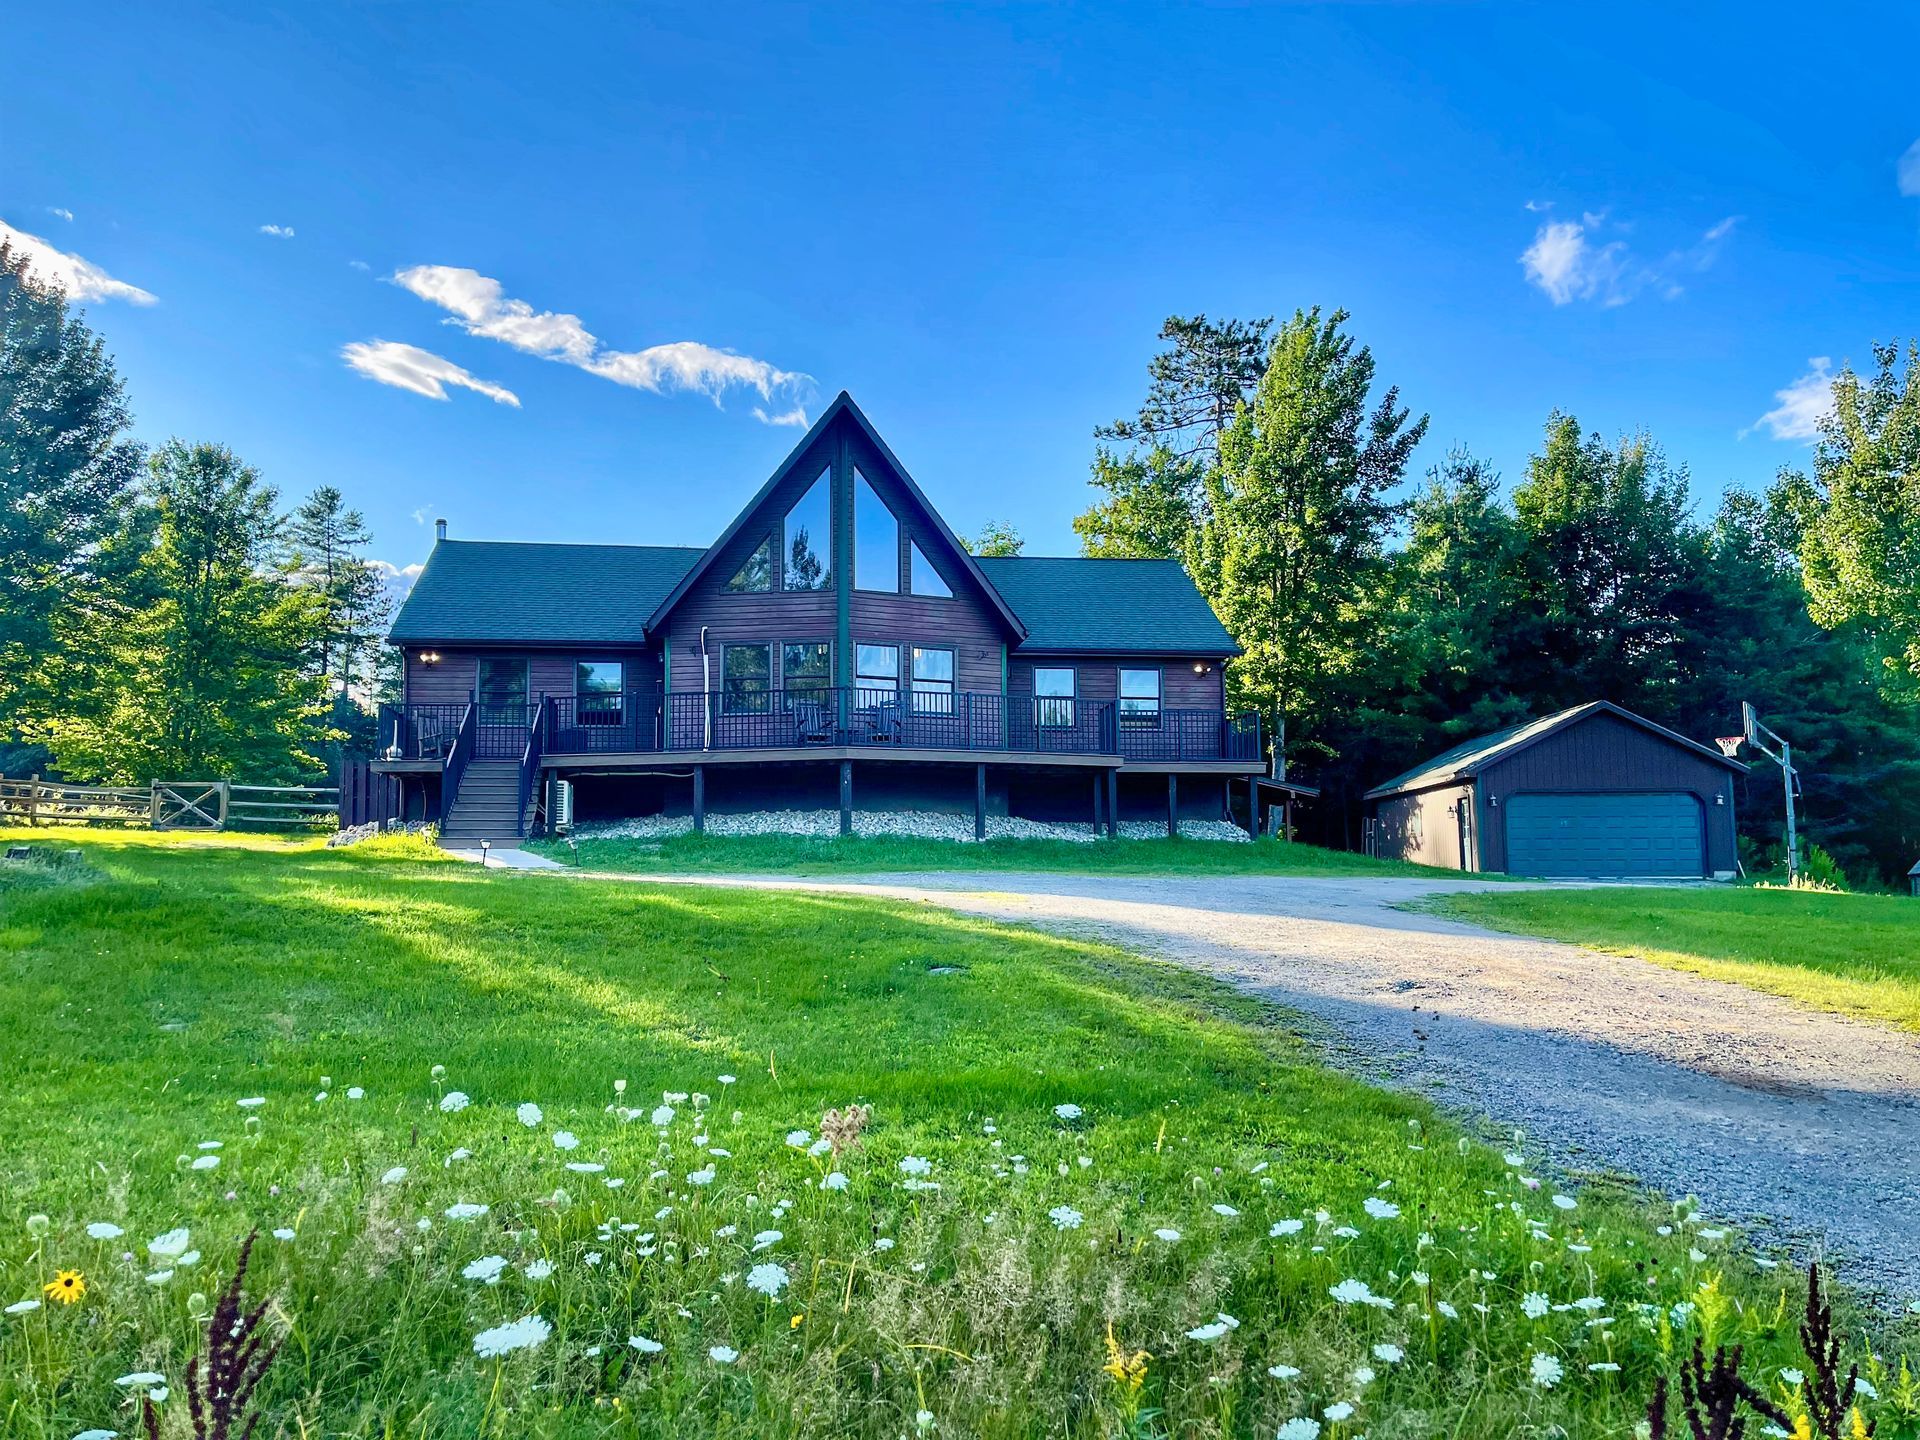 Adirondack Alpine Cabin with long driveway and large spacious home set in the Adirondacks